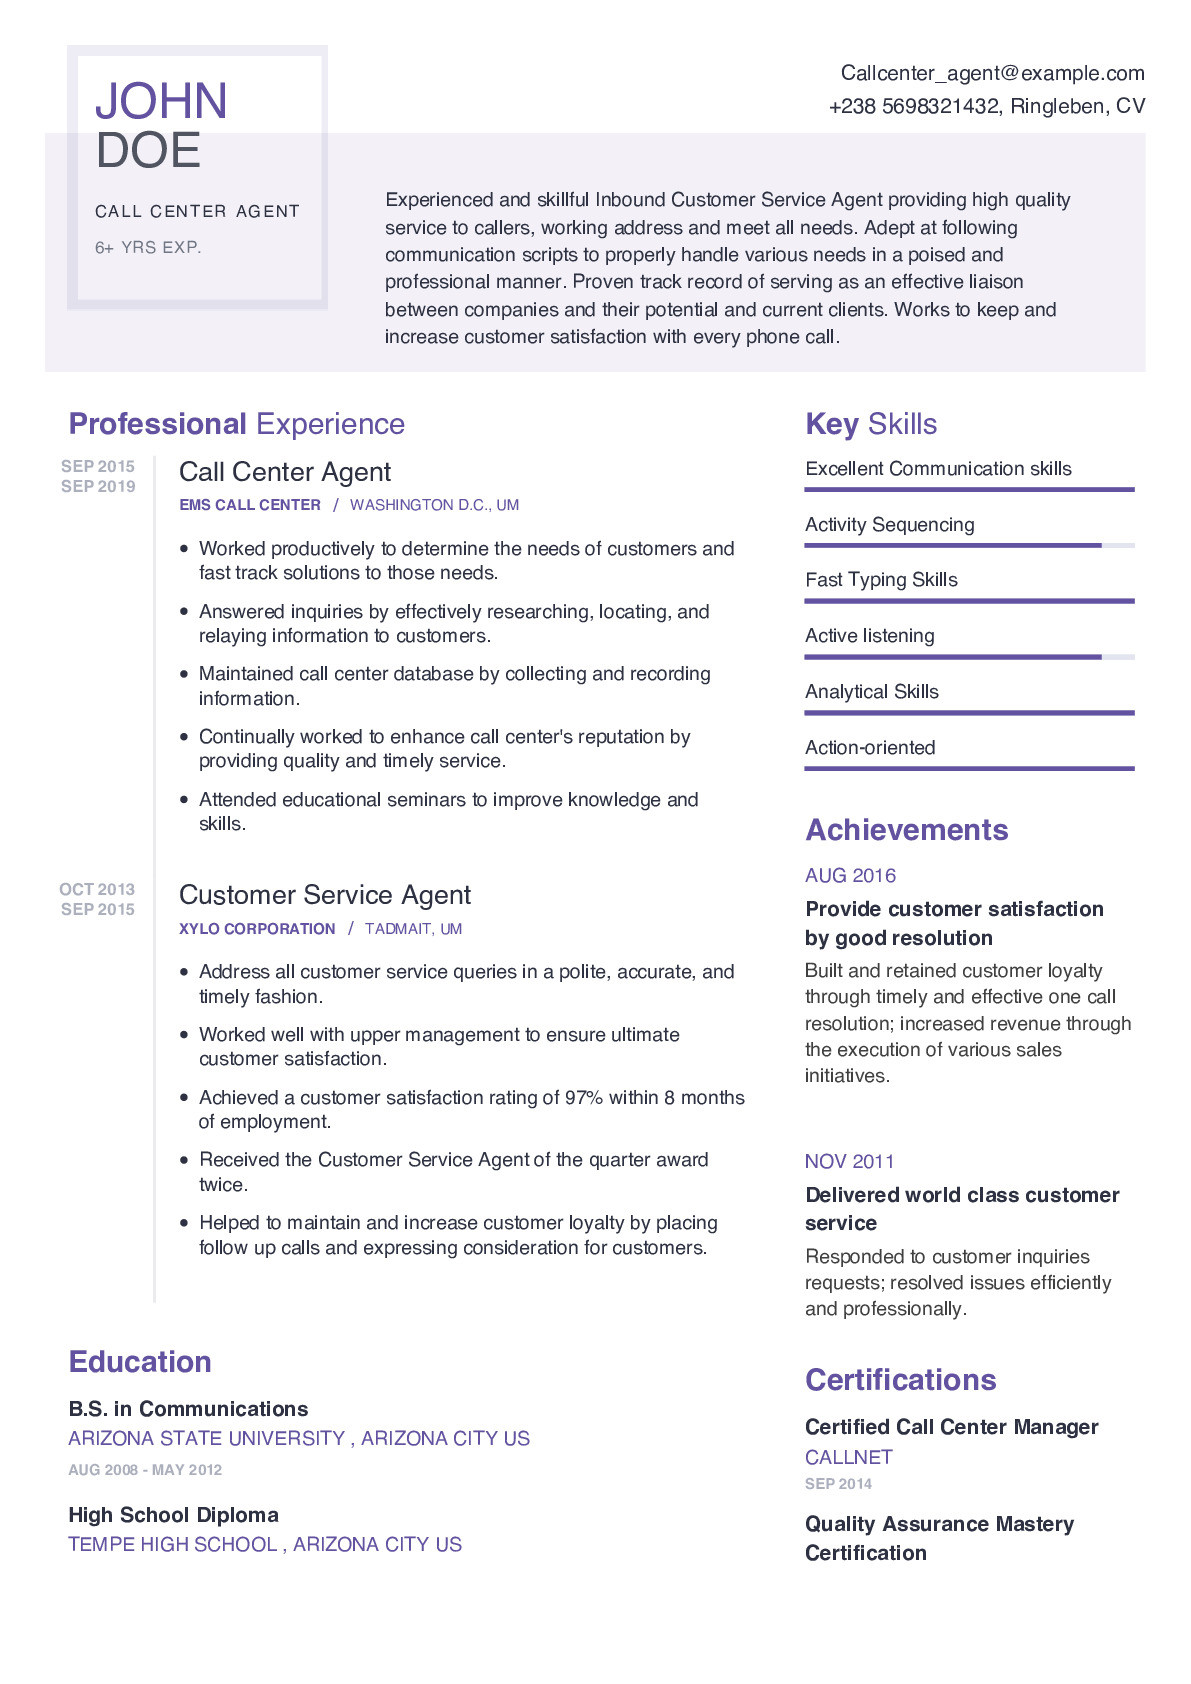 Sales Resume Samples Call Center Agent Call Center Agent Resume Example with Content Sample Craftmycv